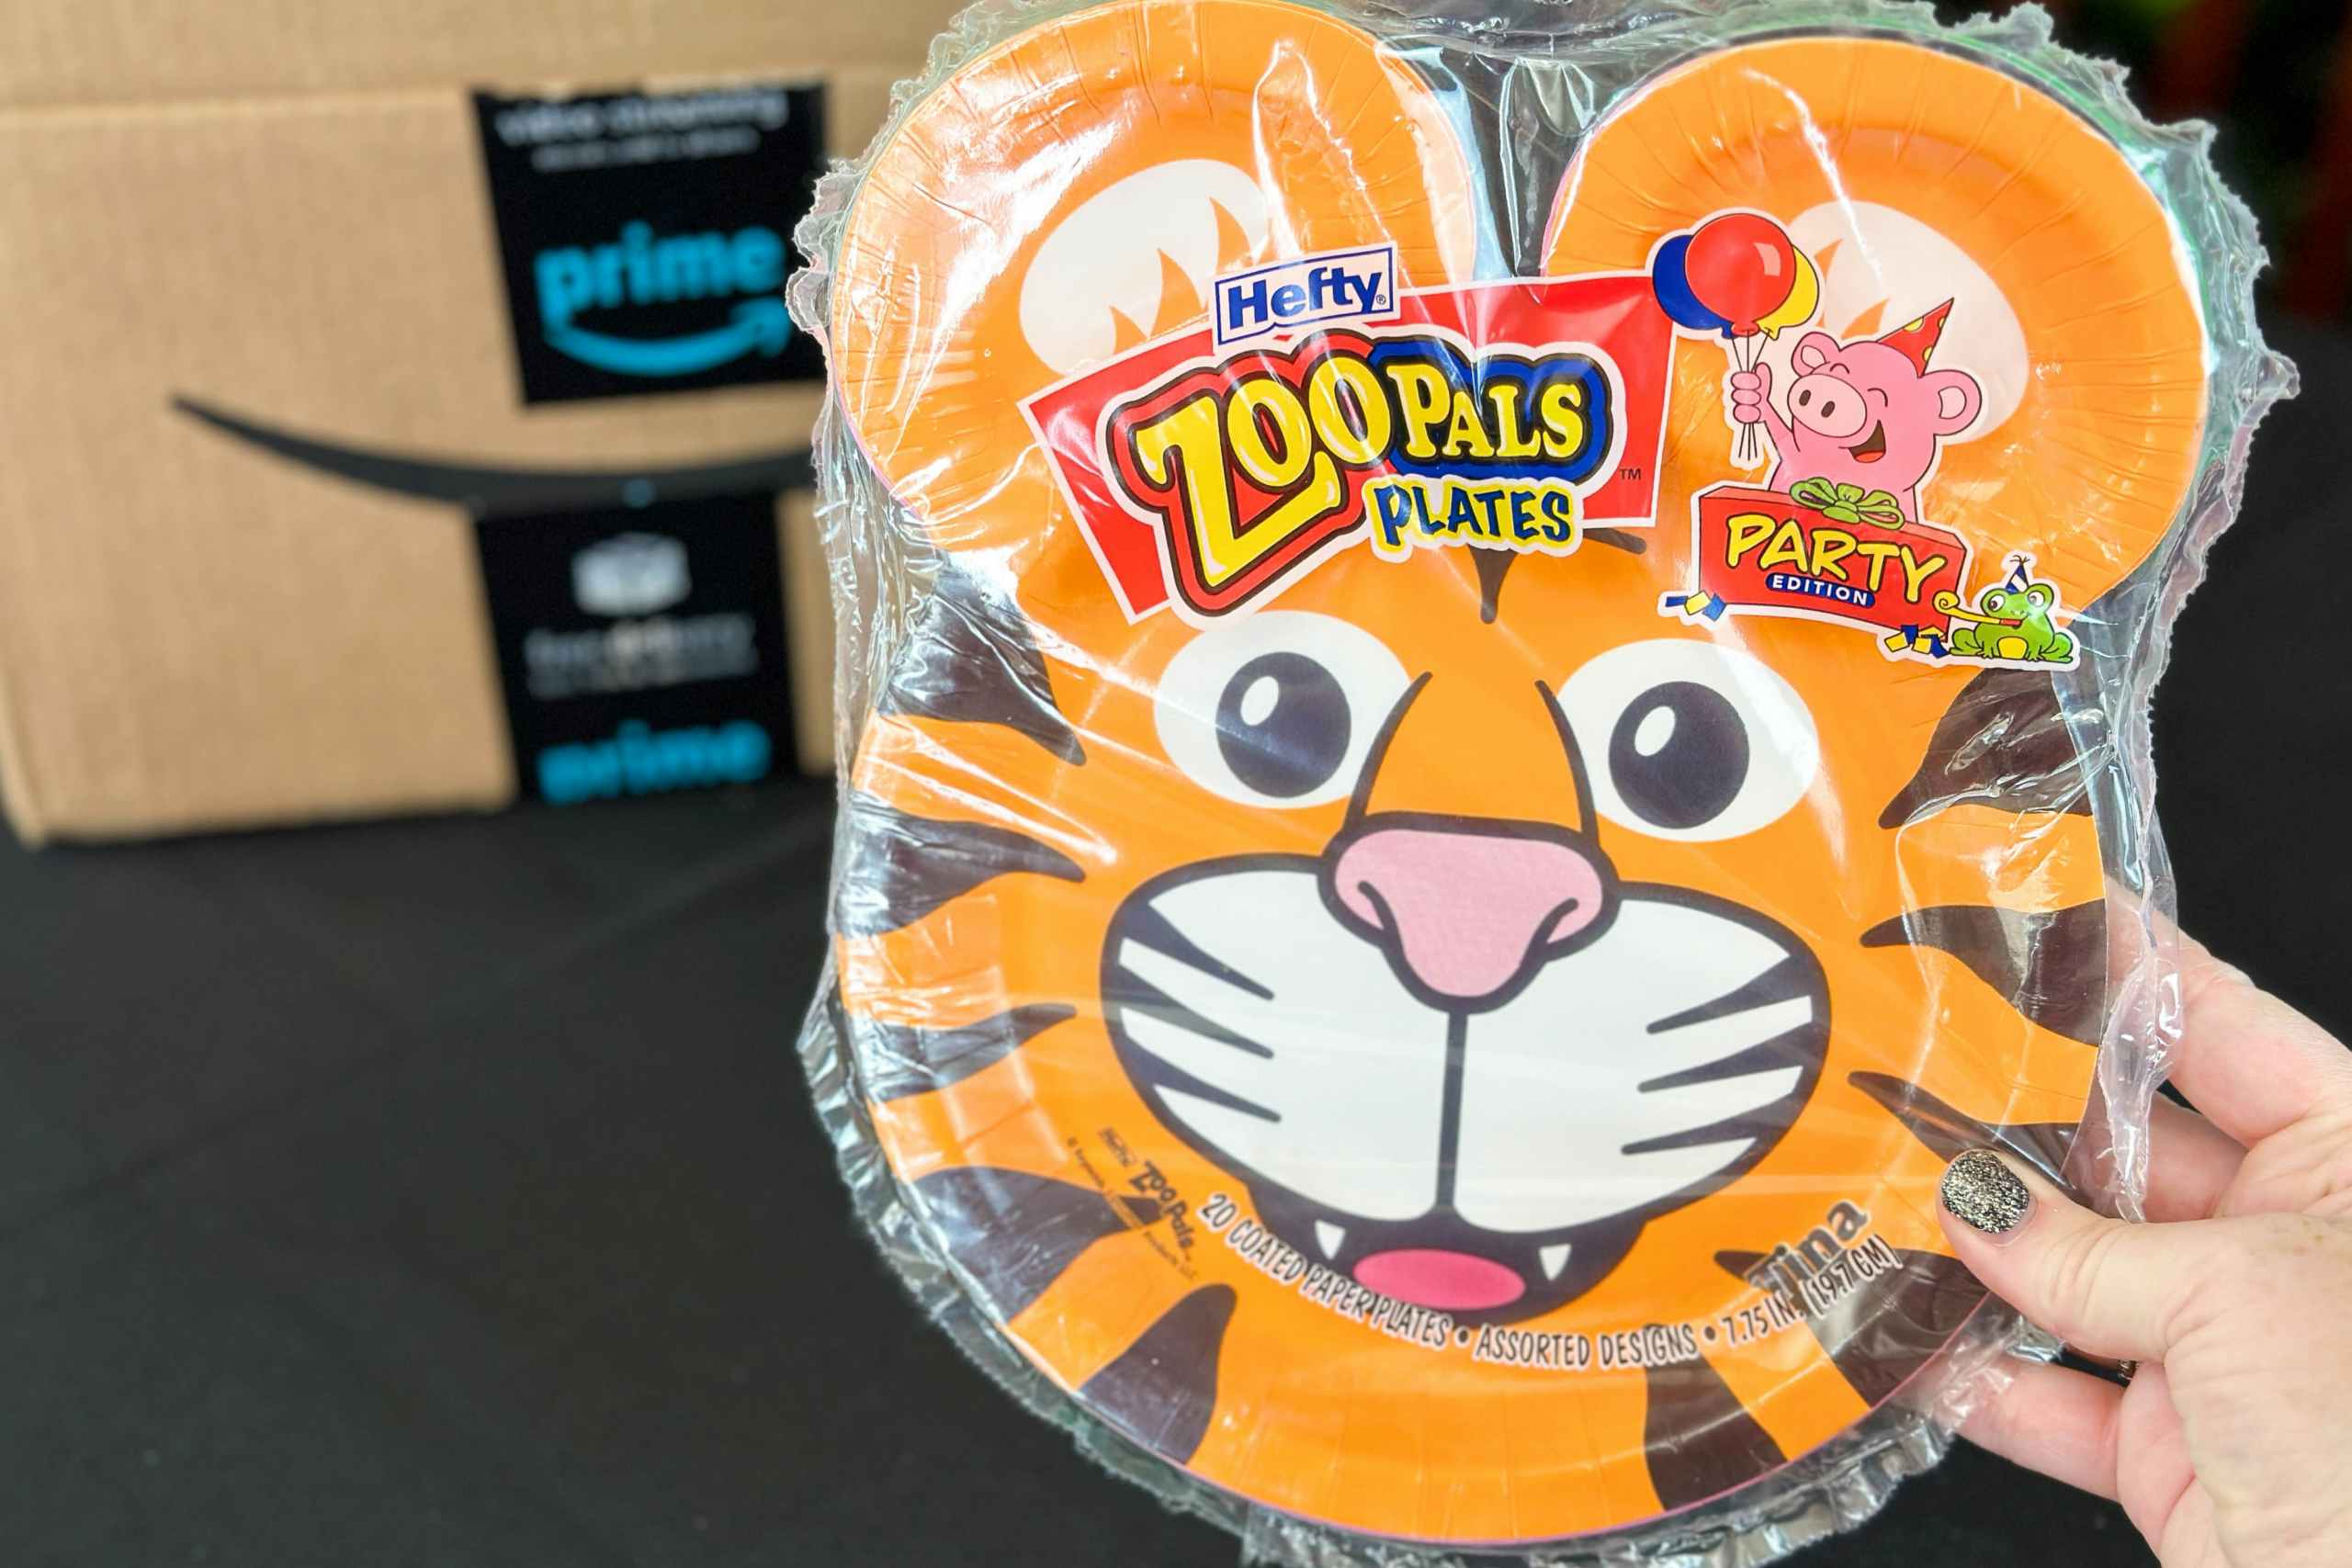 Hefty Zoo Pals Paper Plates 20-Pack, as Low as $5.24 on Amazon